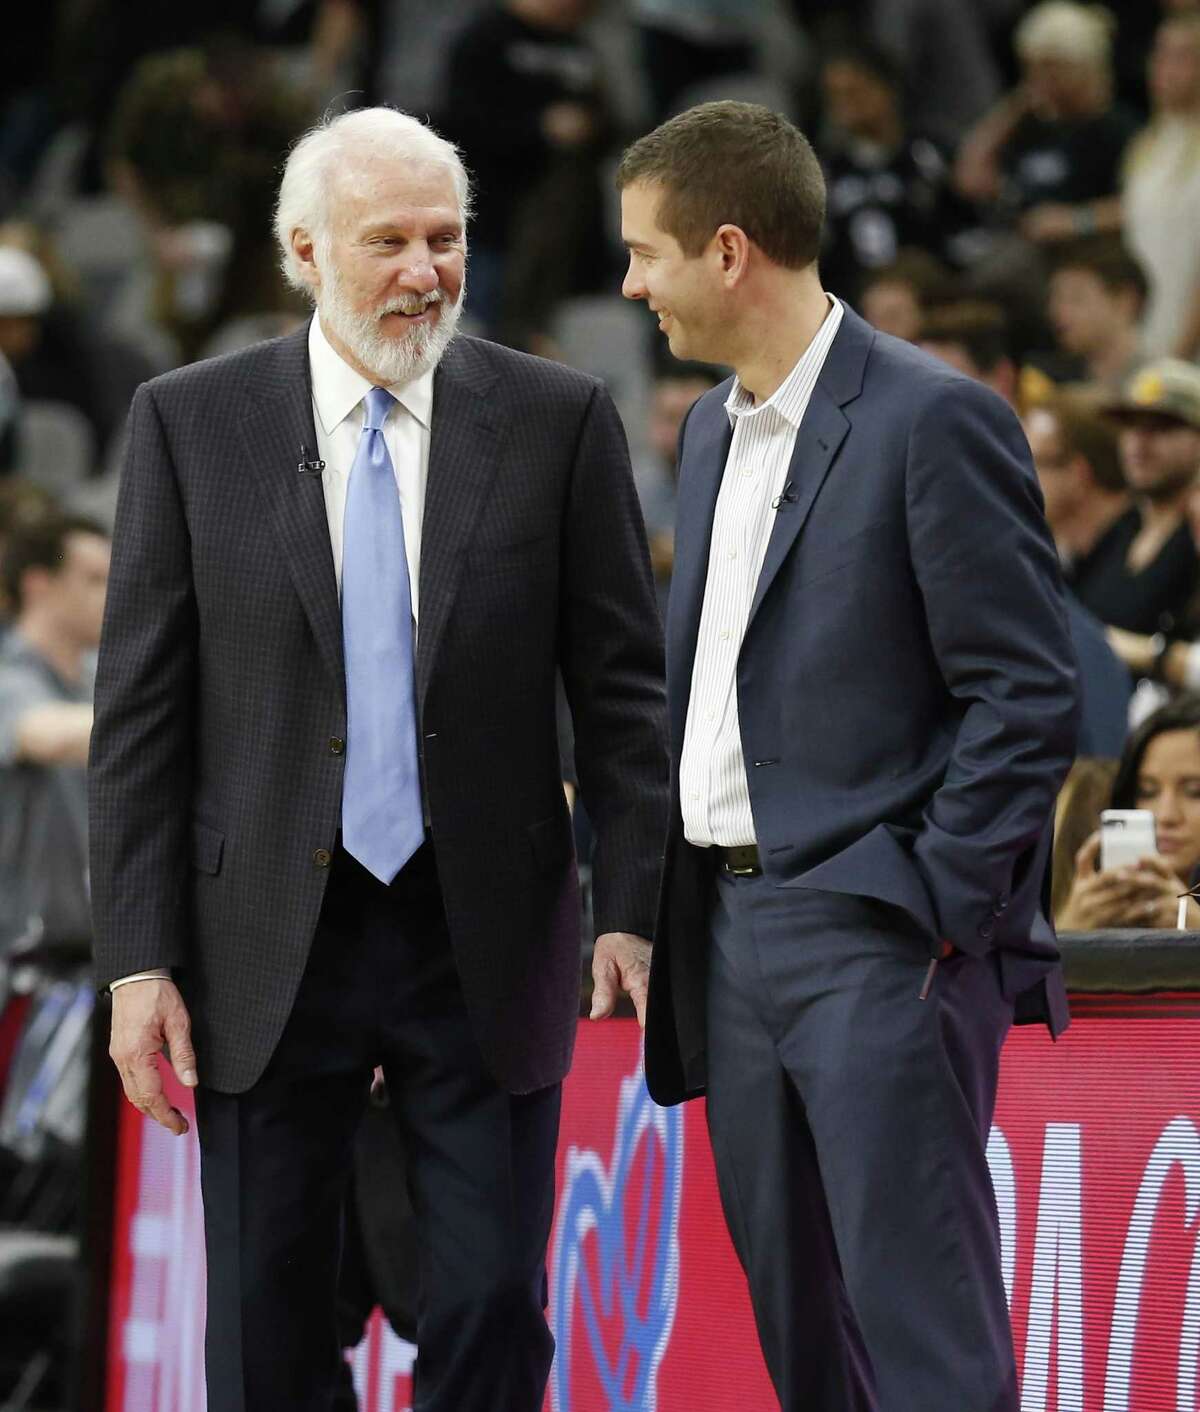 When Boston’s Brad Stevens replaced Gregg Popovich as NBA general managers’ choice for best coach in a poll seven months ago, few quibbled. But after being run out of the playoffs by the Bucks, even Stevens confessed he “did a bad job.”